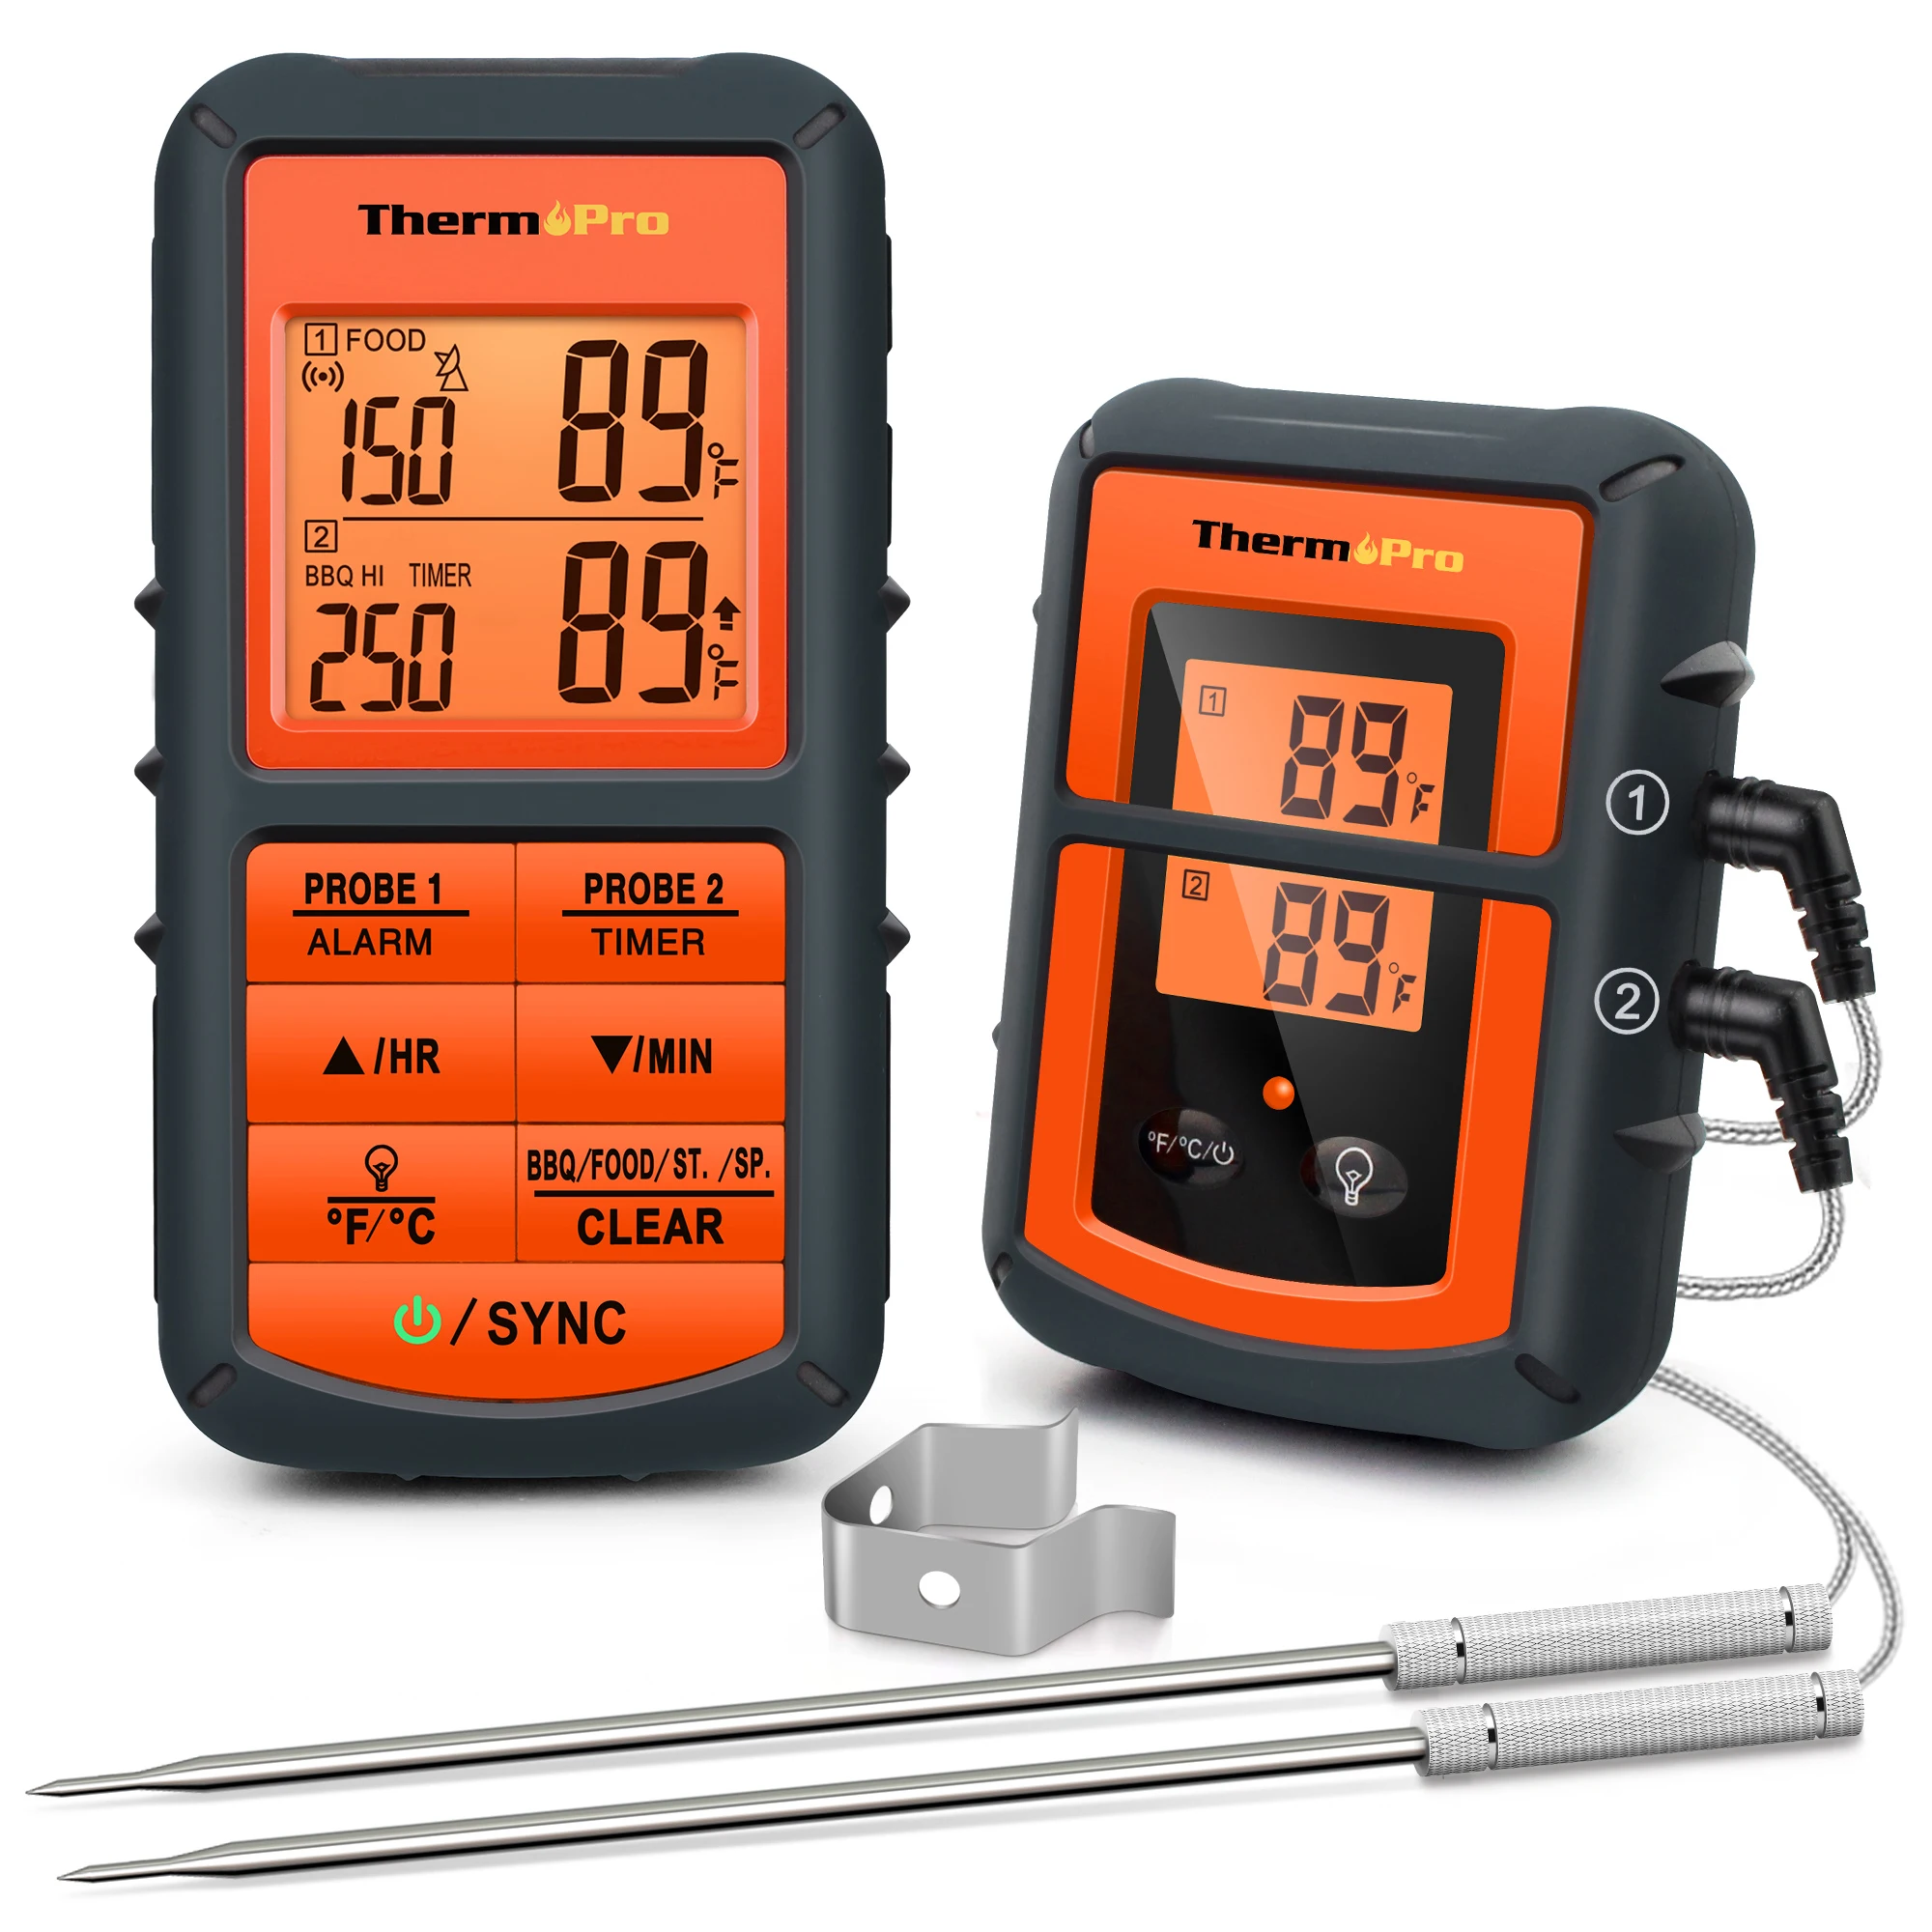 ThermoPro Digital Thermometer Meat Cooking & Timer Alarm for BBQ Food Oven Grill